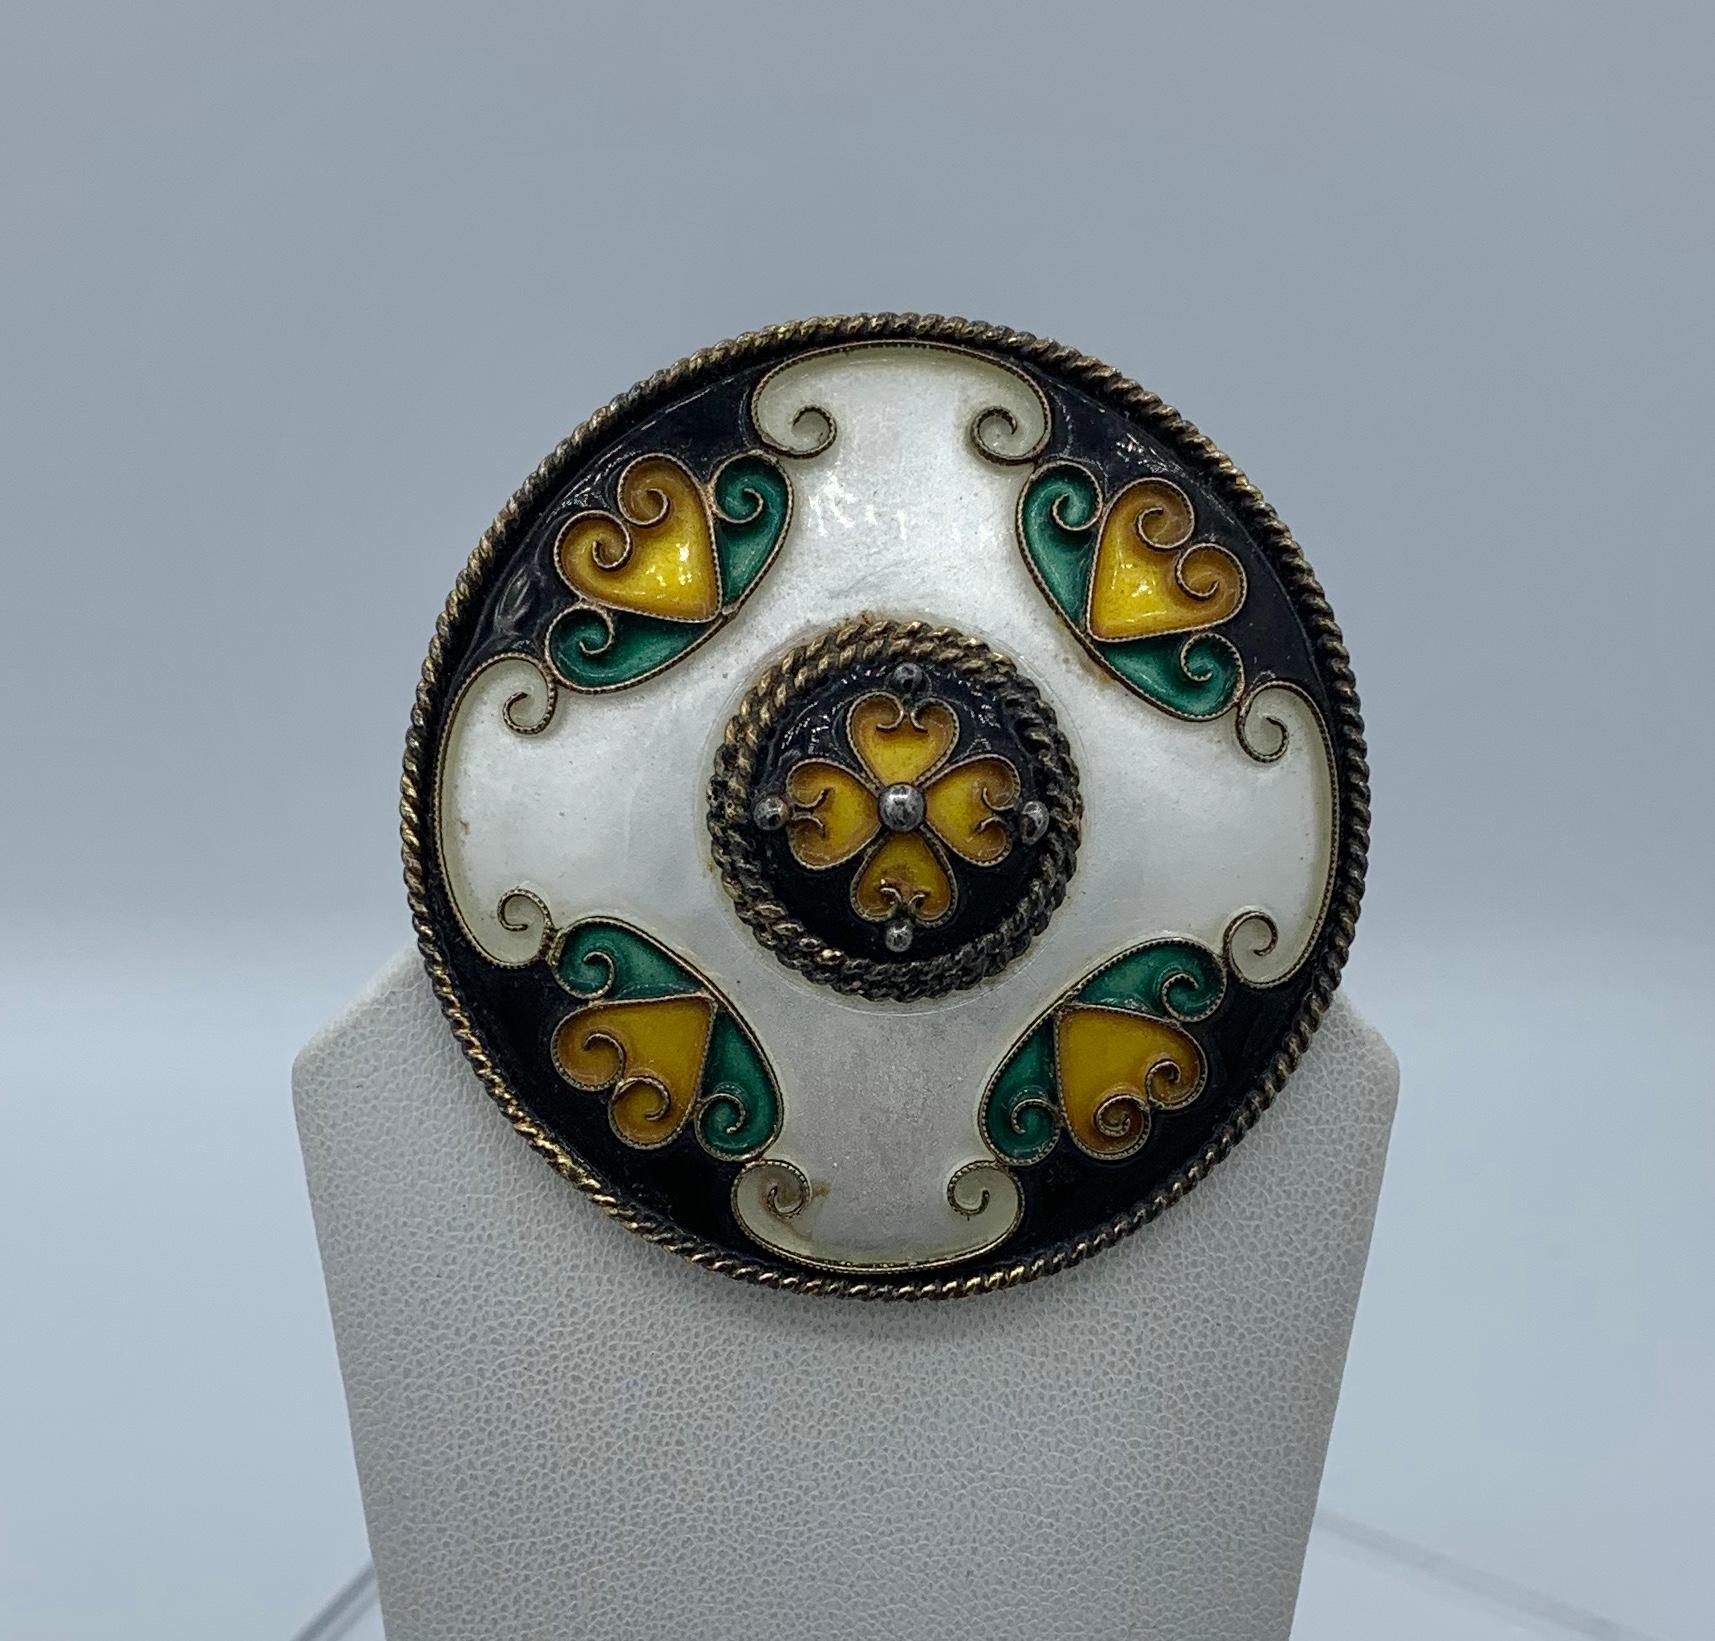 This is a wonderful Mid-Century Modern Sterling Silver Enamel Brooch by the esteemed Norwegian maker Andresen & Scheinpflug.  Pieces by Andresen and Scheinpflug are rare and highly desirable as objects of Mid-Century Modern design. 
Their use of